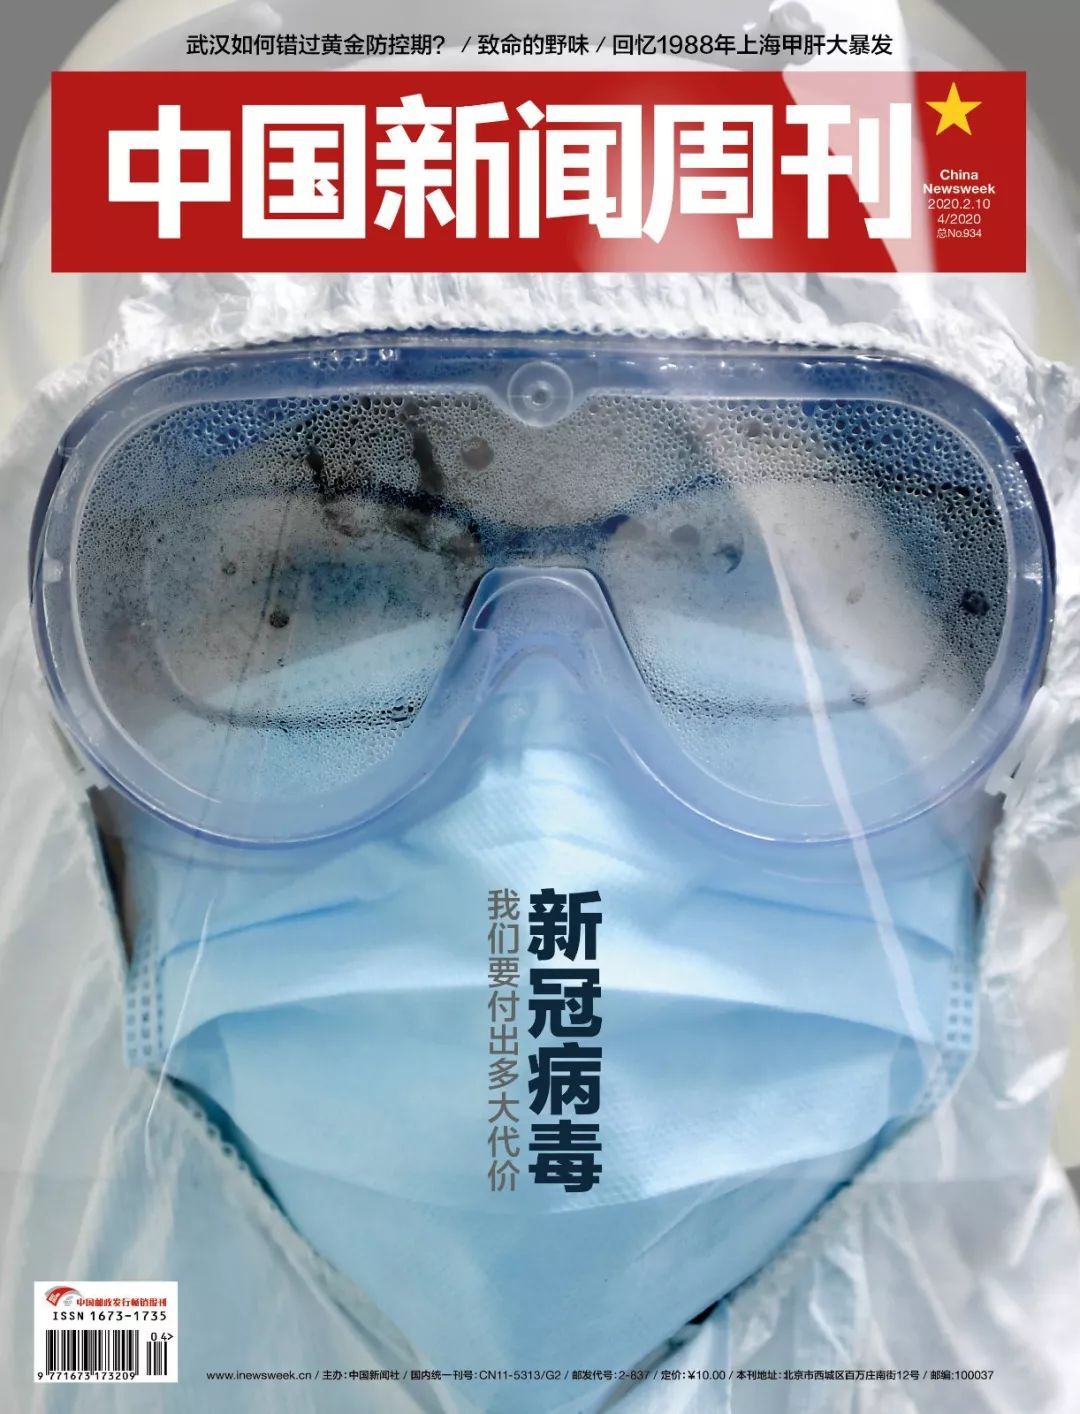 The Regret of Wuhan: How China Missed the Critical Window for Controlling the Coronavirus Outbreak